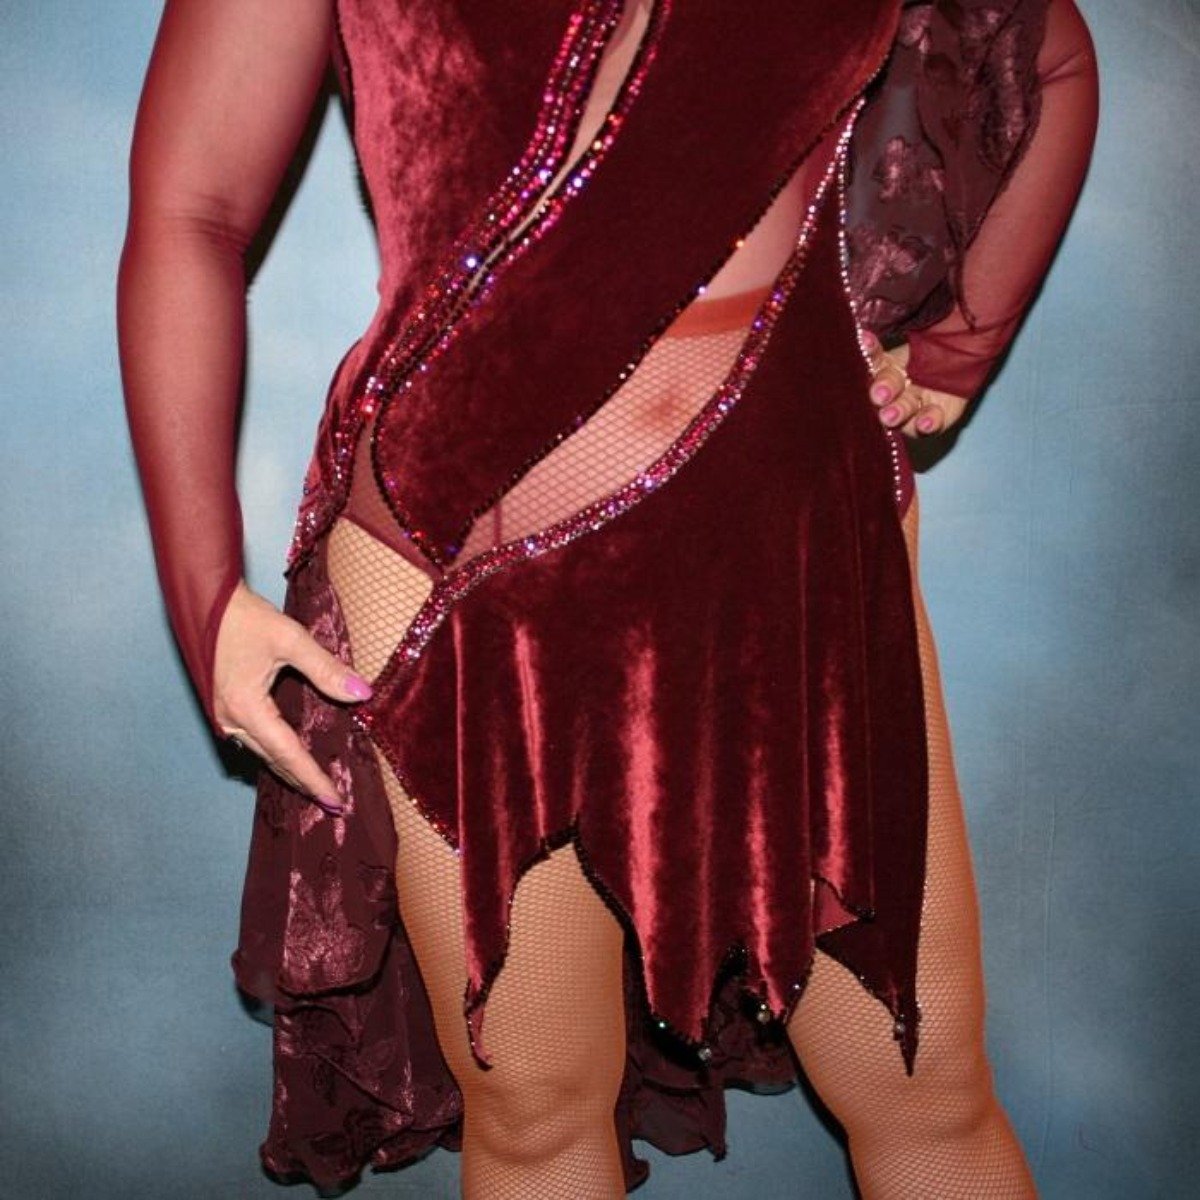 Crystal's Creations close up of Burgundy stretch velvet Latin/rhythm dress created on burgundy stretch mesh base with rose patterned clip/cut chiffon, is embellished with burgundy, fuchsia, antique rose, & orchid Swarovski rhinestone work & a touch of Swarovski hand beading.